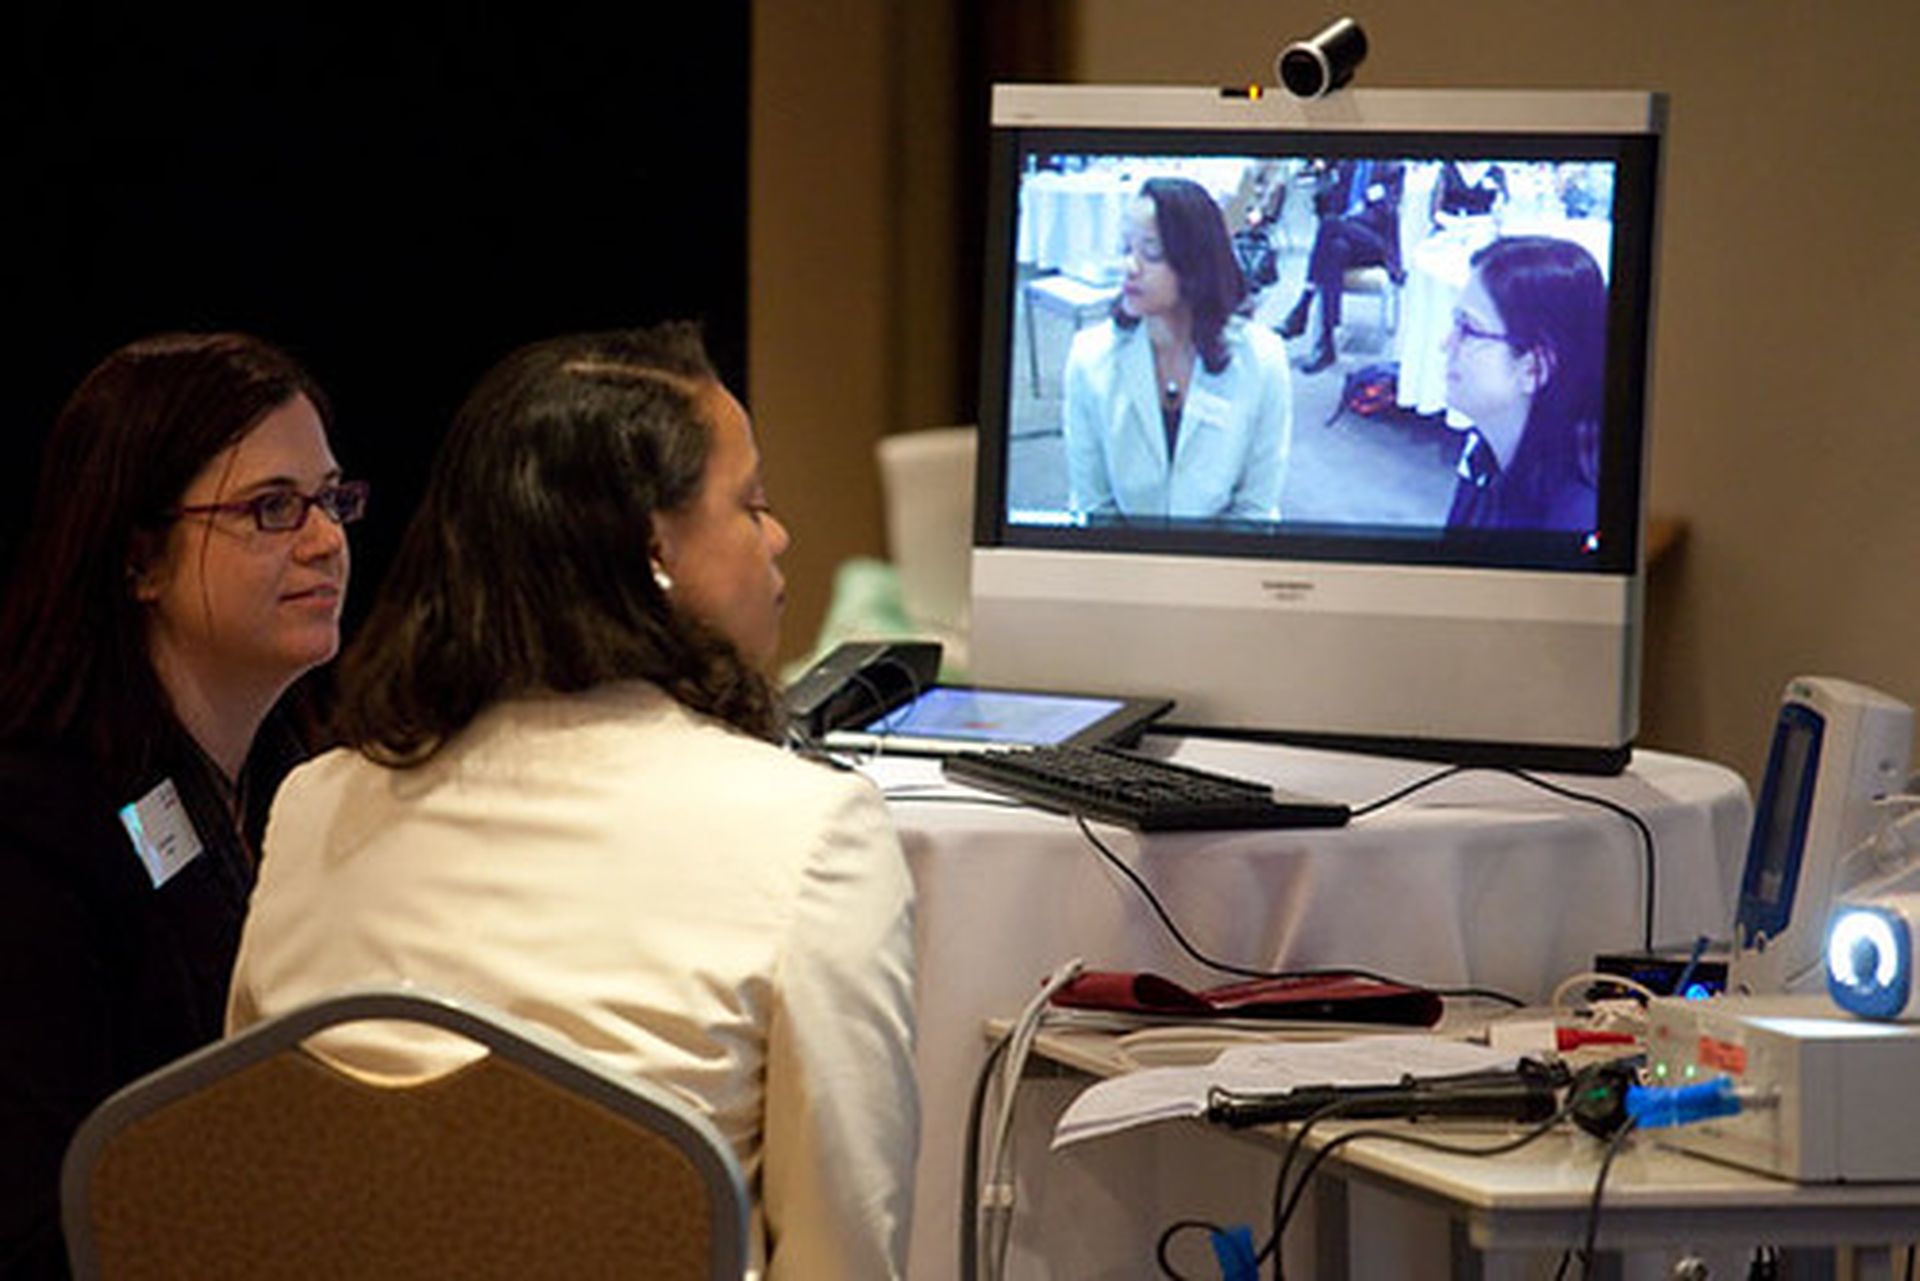 New HC3 guidance on healthcare web app attacks and remediation strategies shows telehealth platforms are among the most commonly targeted by these threat actors.  (Photo credit: &#8220;Live telehealth demonstration &#8230;&#8221; by CiscoANZ is licensed under CC BY 2.0.)